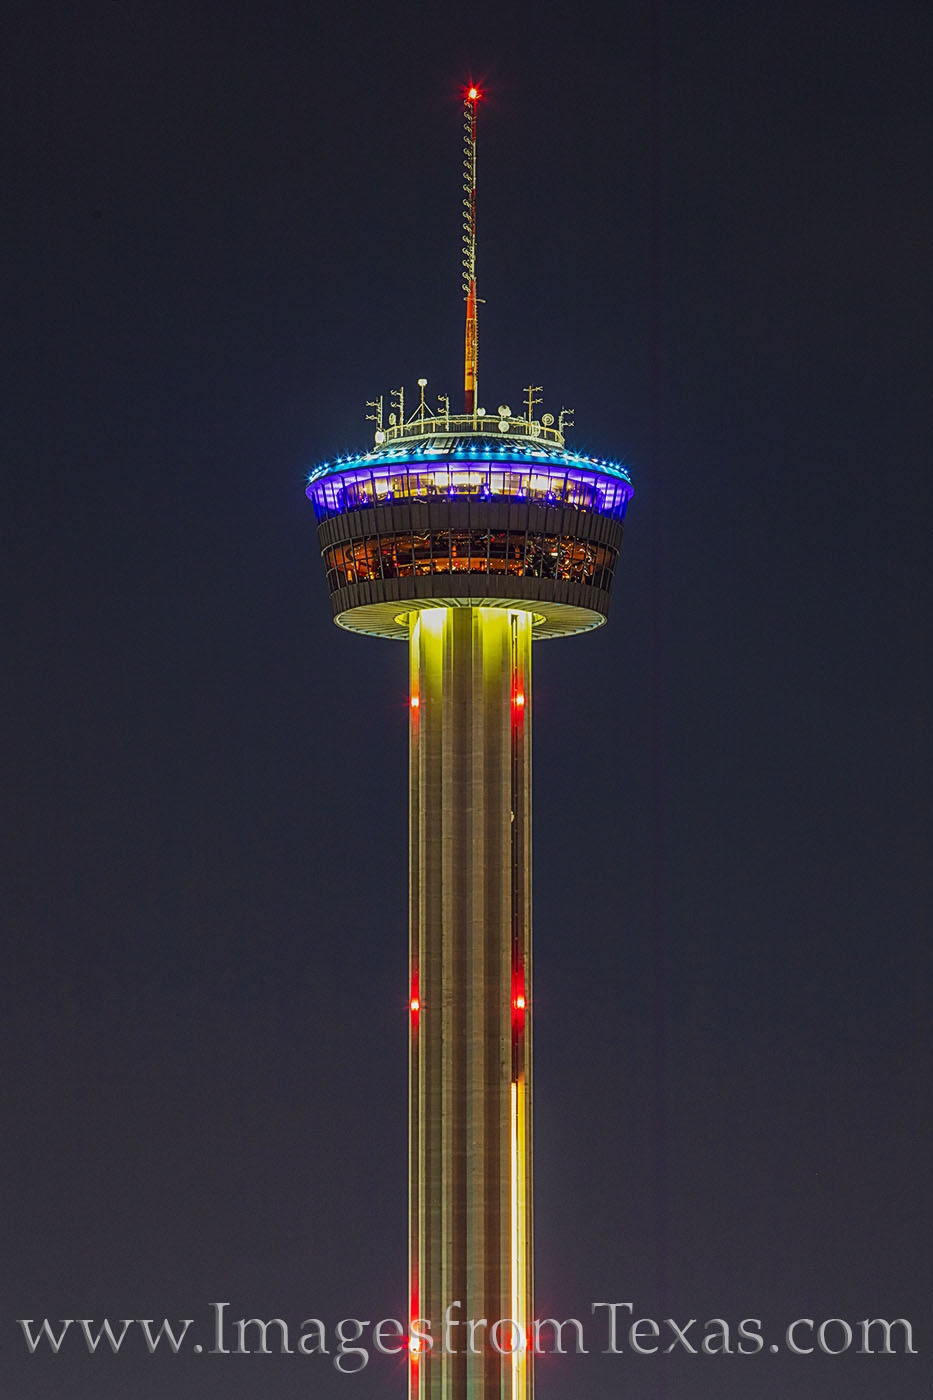 Rising 750 feet into the air, the Tower of the Americas is the 2nd highest observation deck in the United States.